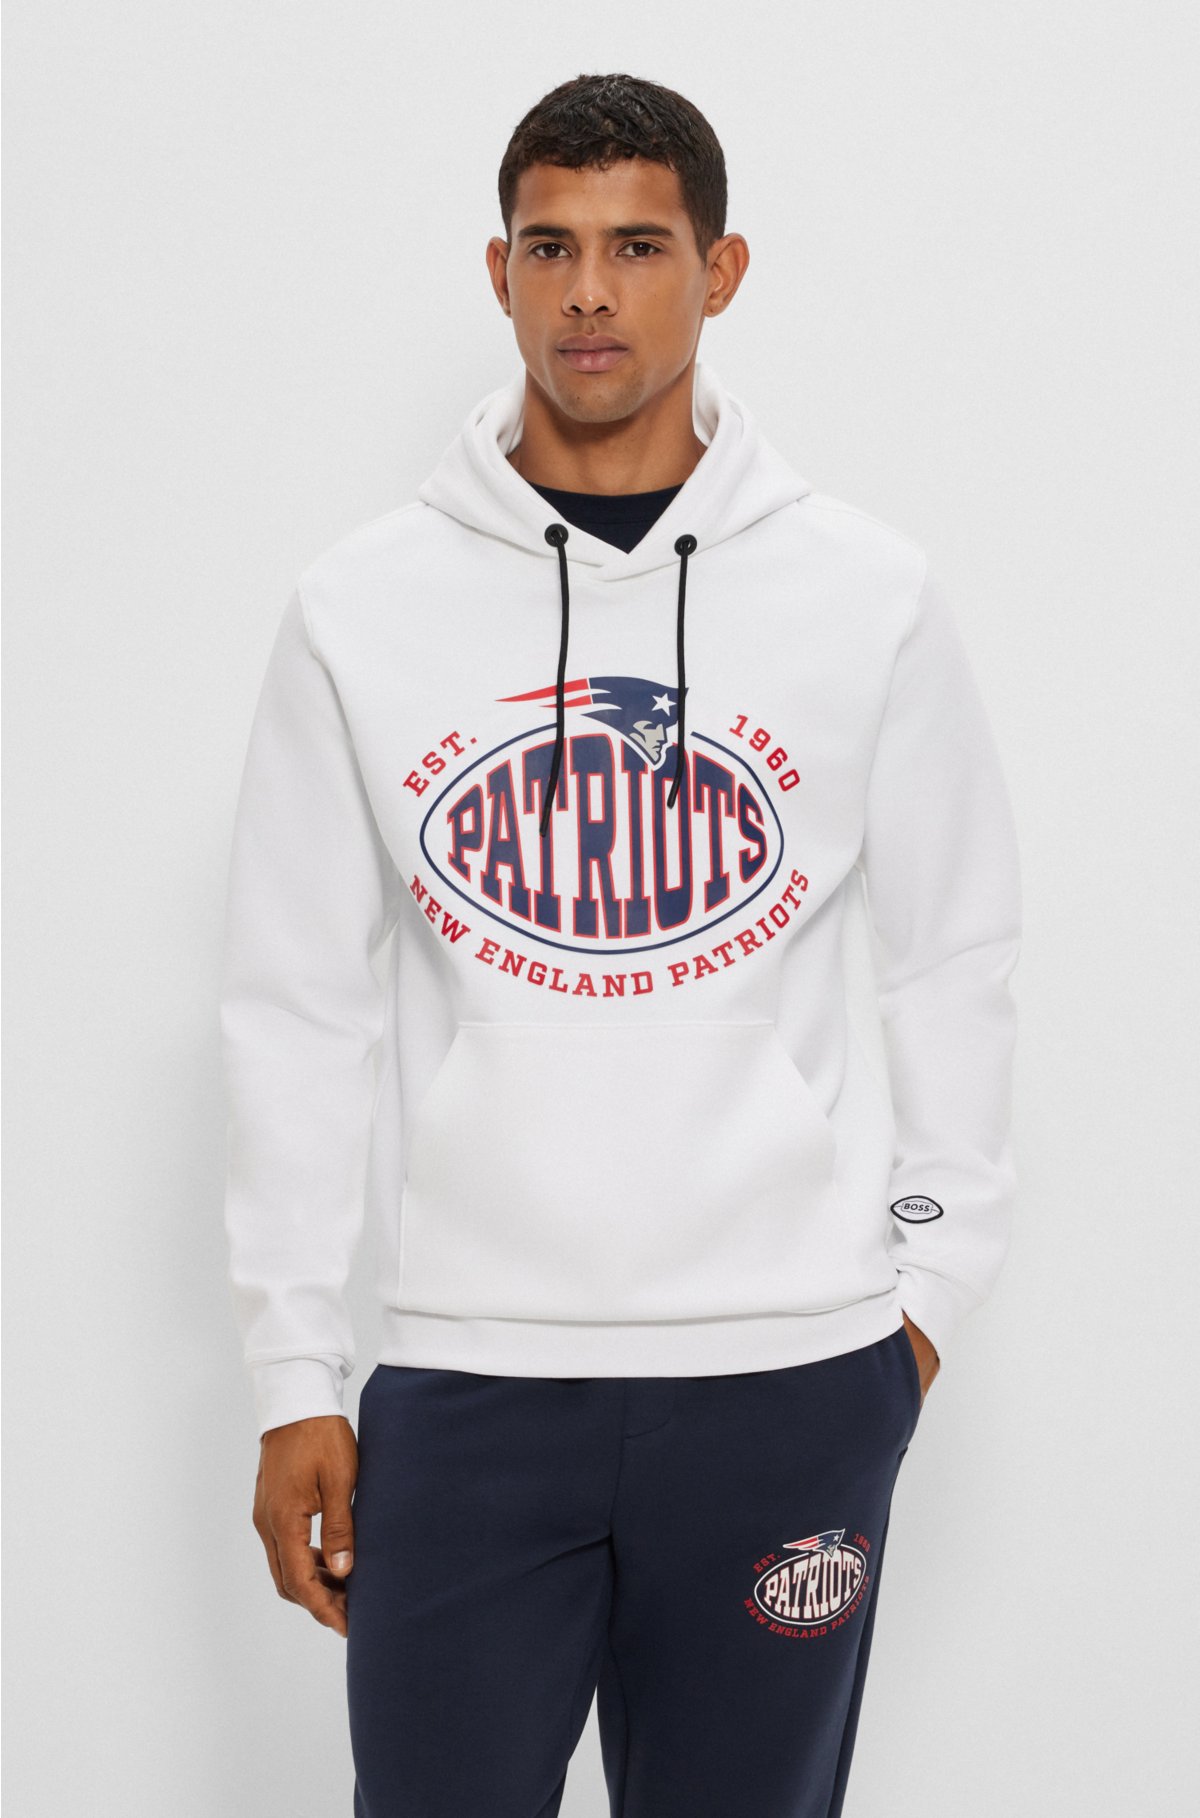 BOSS x NFL cotton-blend hoodie with collaborative branding